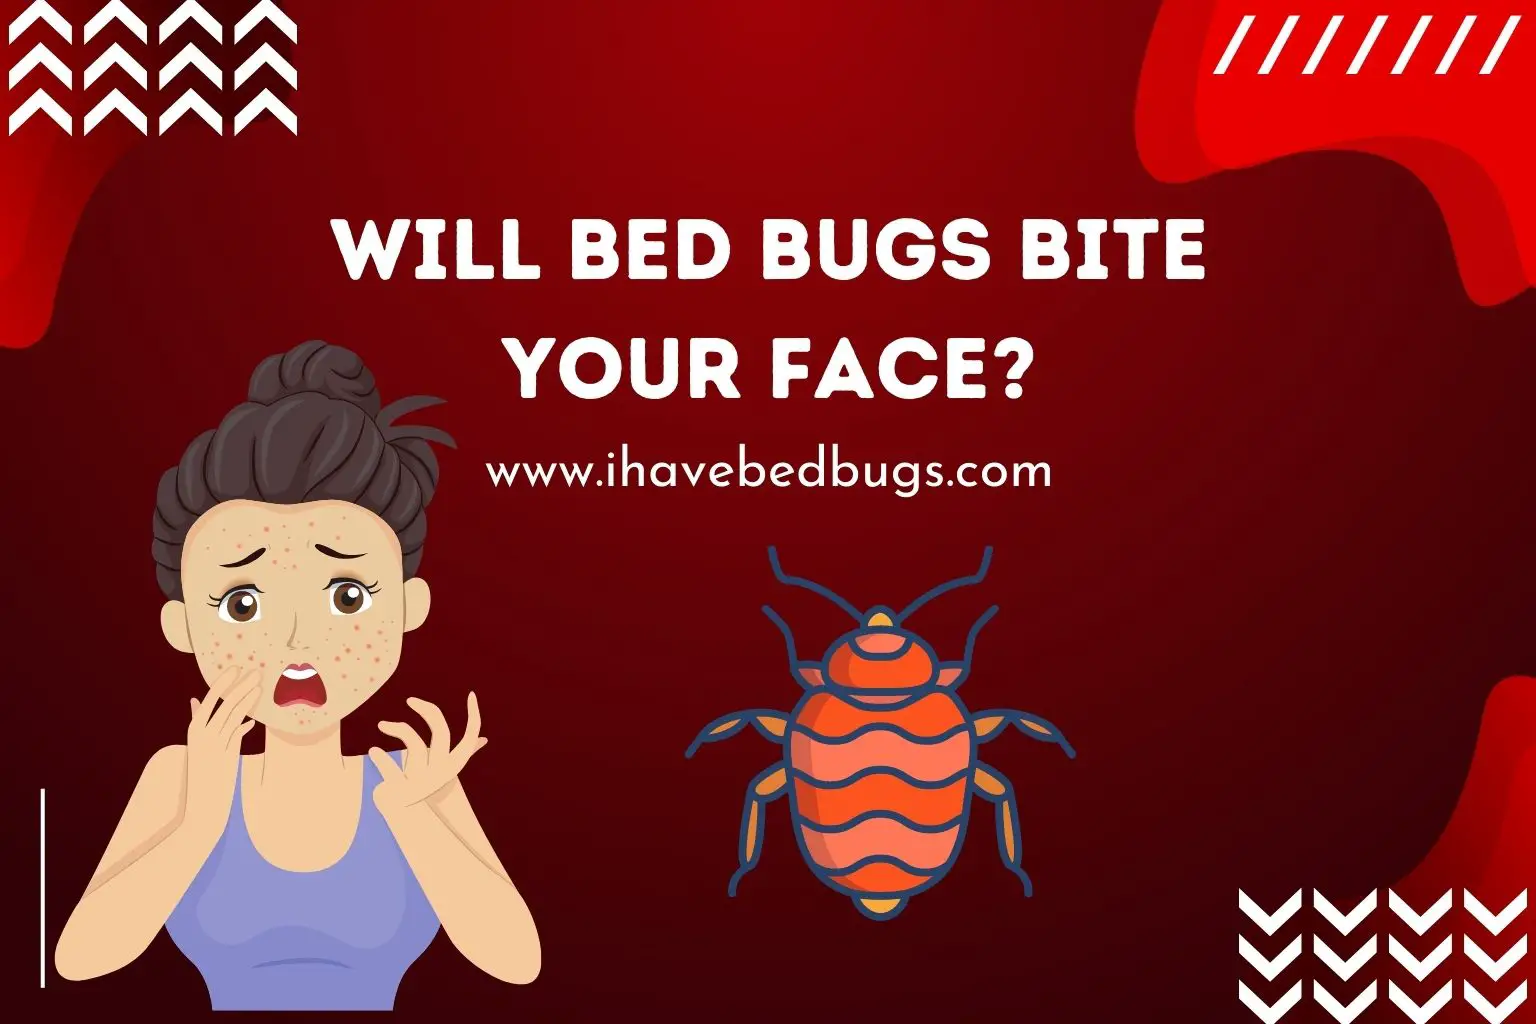 Will bed bugs bite your face